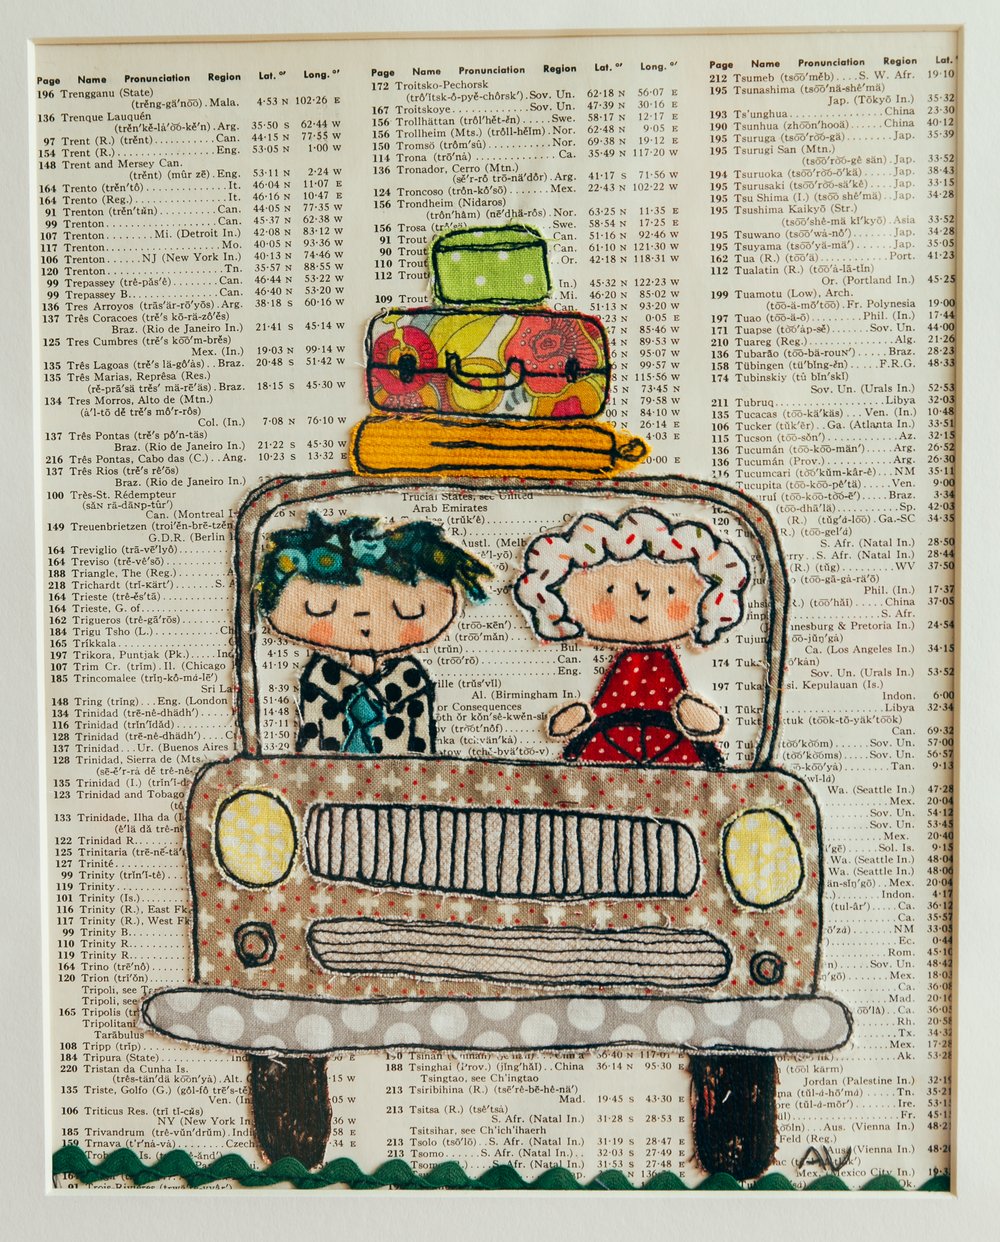 Image of Let's Go See the World! 2 - Free Motion Embroidery on Vintage Atlas Page